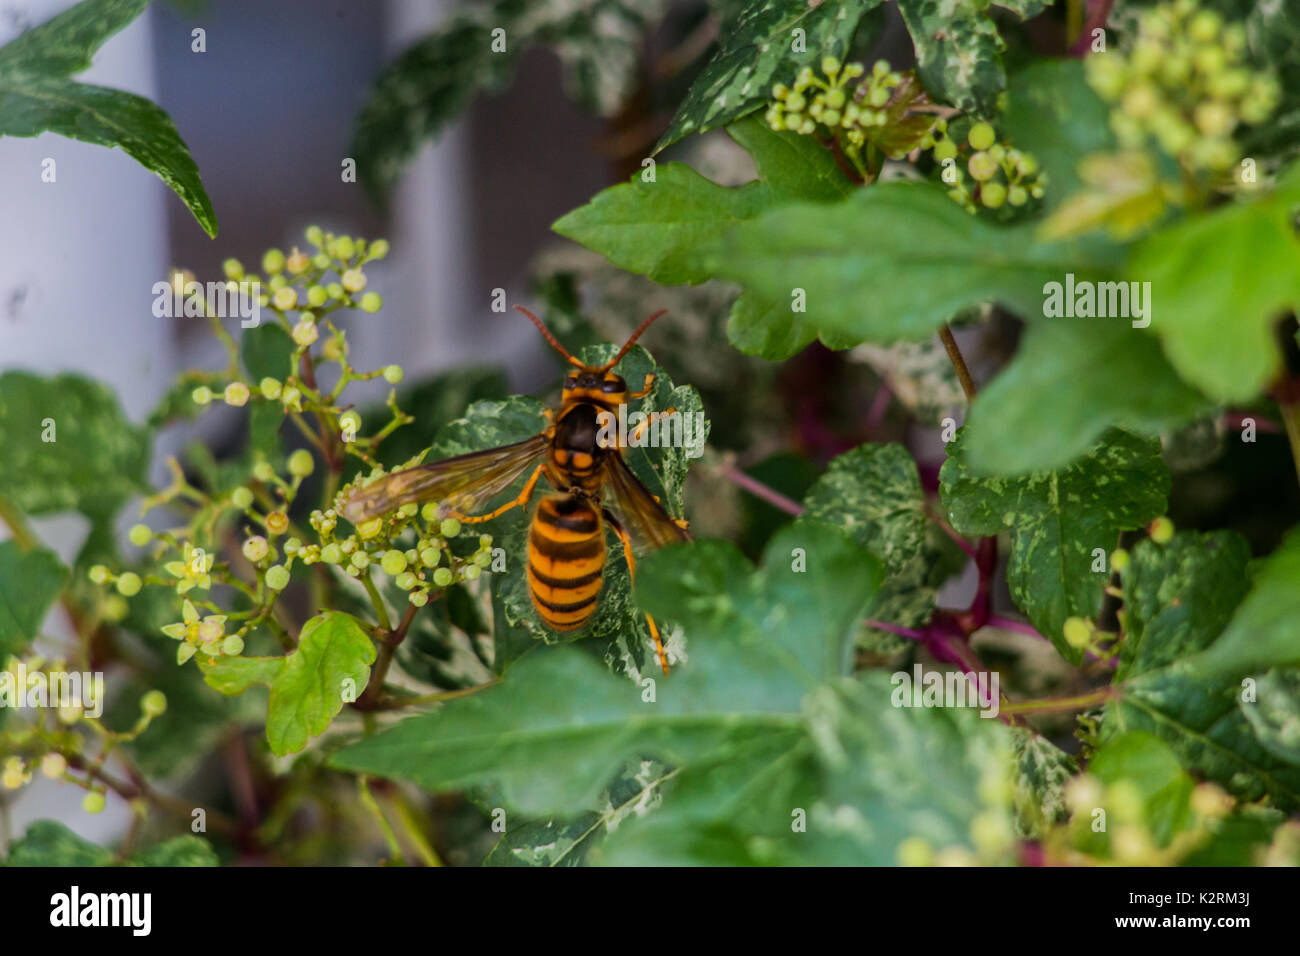 A Japanese giant hornet rests on some small flowerbuds on a walk in Oiso, Japan Stock Photo